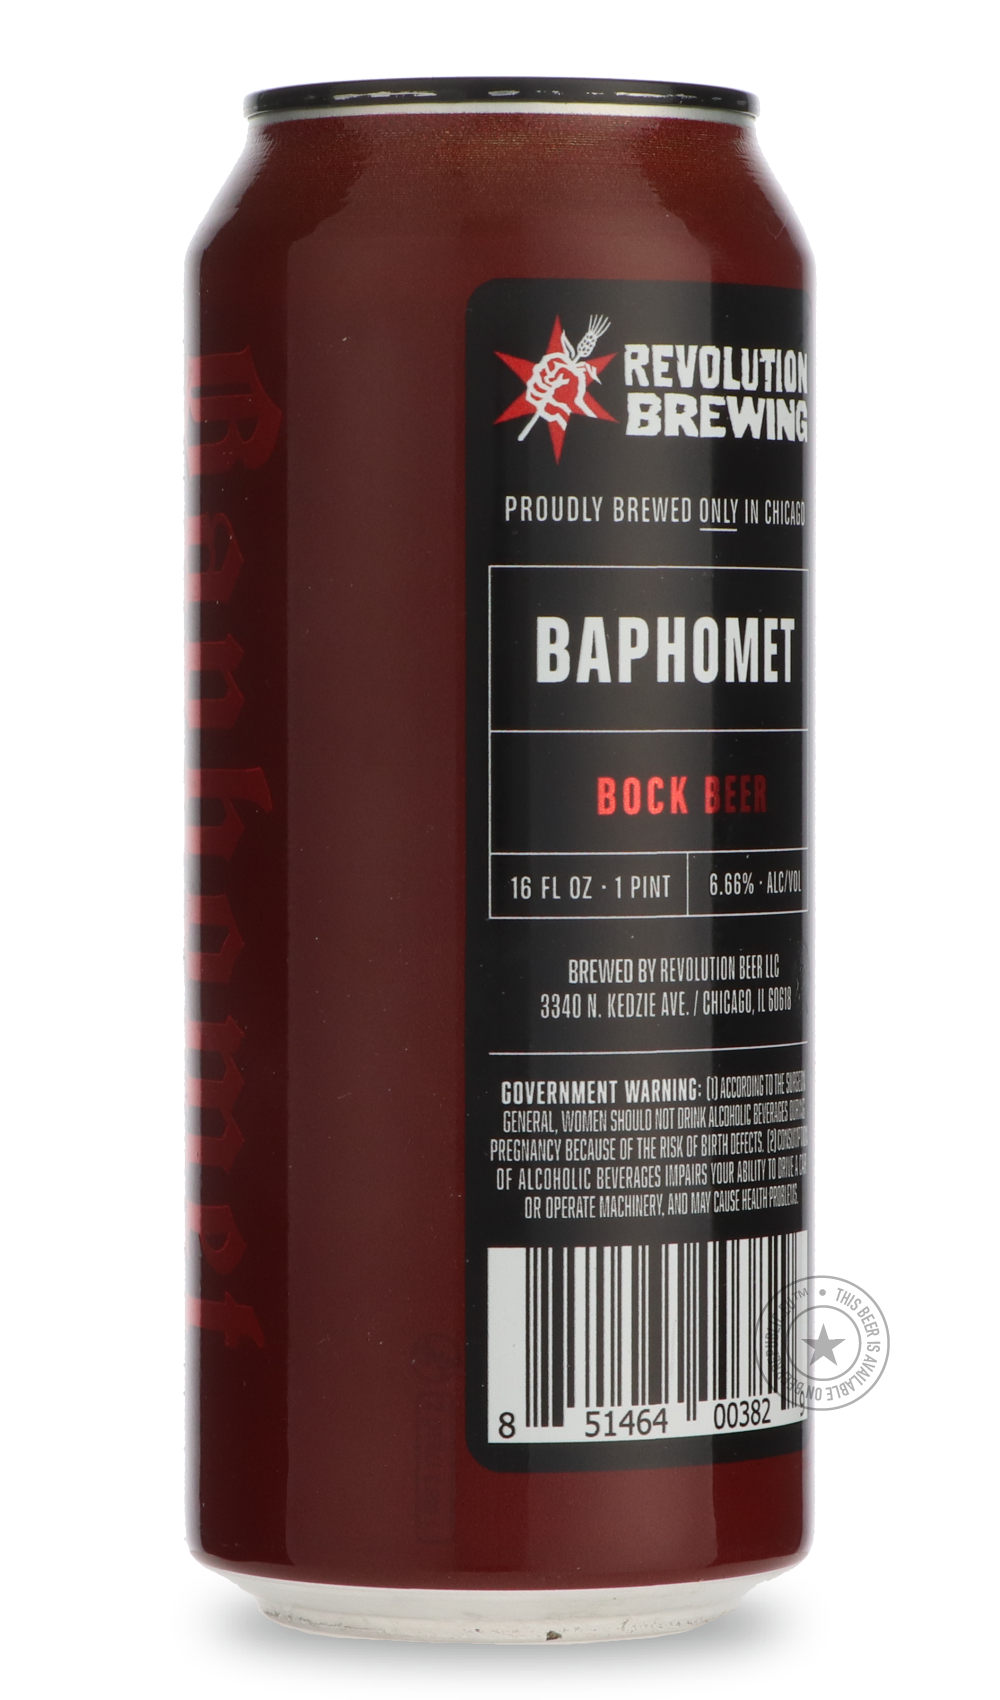 -Revolution- Baphomet-Brown & Dark- Only @ Beer Republic - The best online beer store for American & Canadian craft beer - Buy beer online from the USA and Canada - Bier online kopen - Amerikaans bier kopen - Craft beer store - Craft beer kopen - Amerikanisch bier kaufen - Bier online kaufen - Acheter biere online - IPA - Stout - Porter - New England IPA - Hazy IPA - Imperial Stout - Barrel Aged - Barrel Aged Imperial Stout - Brown - Dark beer - Blond - Blonde - Pilsner - Lager - Wheat - Weizen - Amber - Ba